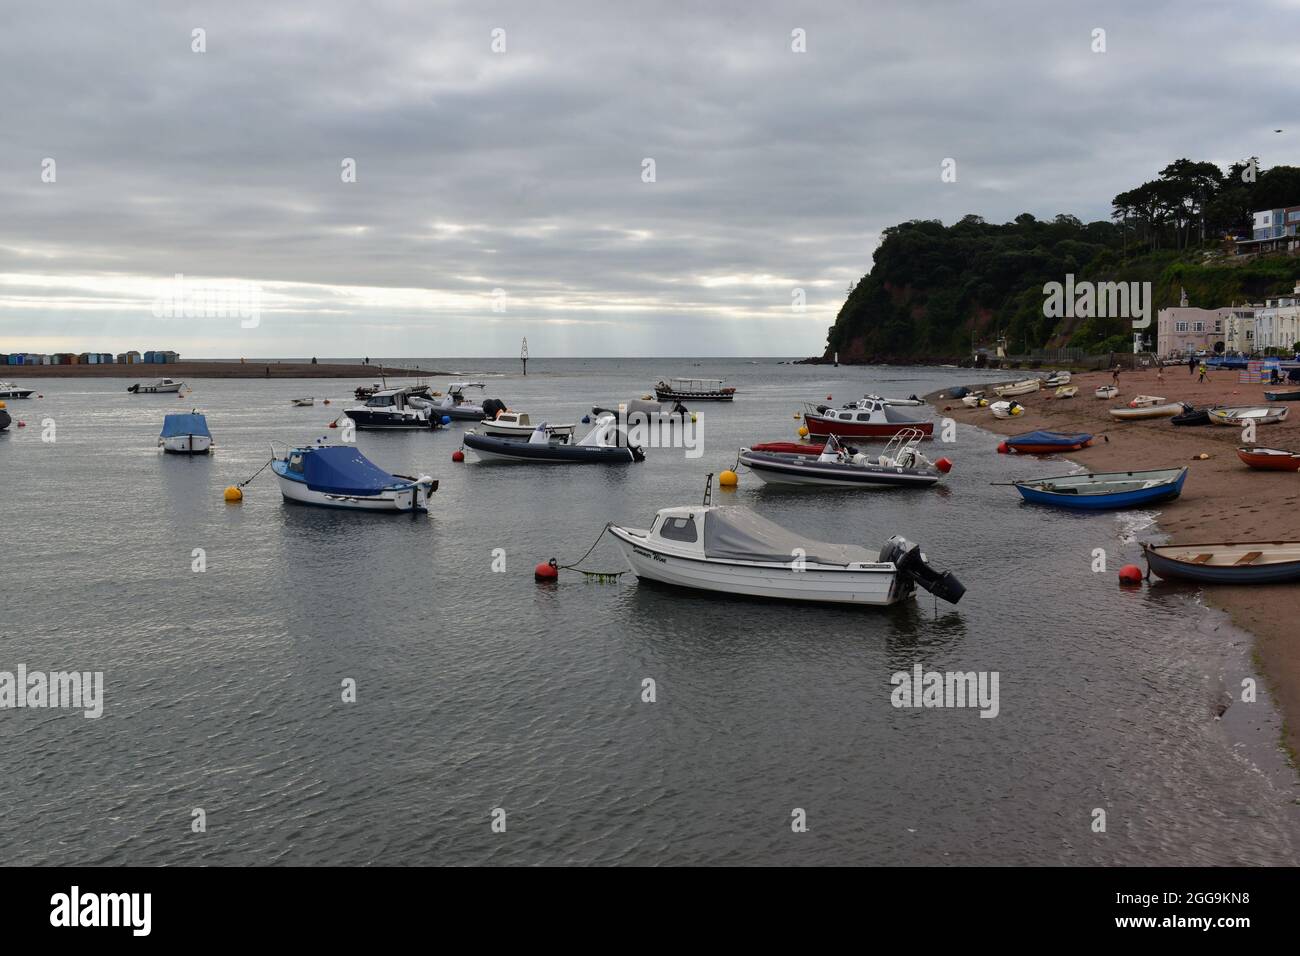 Shaldon Beach is littered with boats moored along the foreshore. Shaldon is opposite Teignmouth at the mouth of the Teign Estuary. Stock Photo